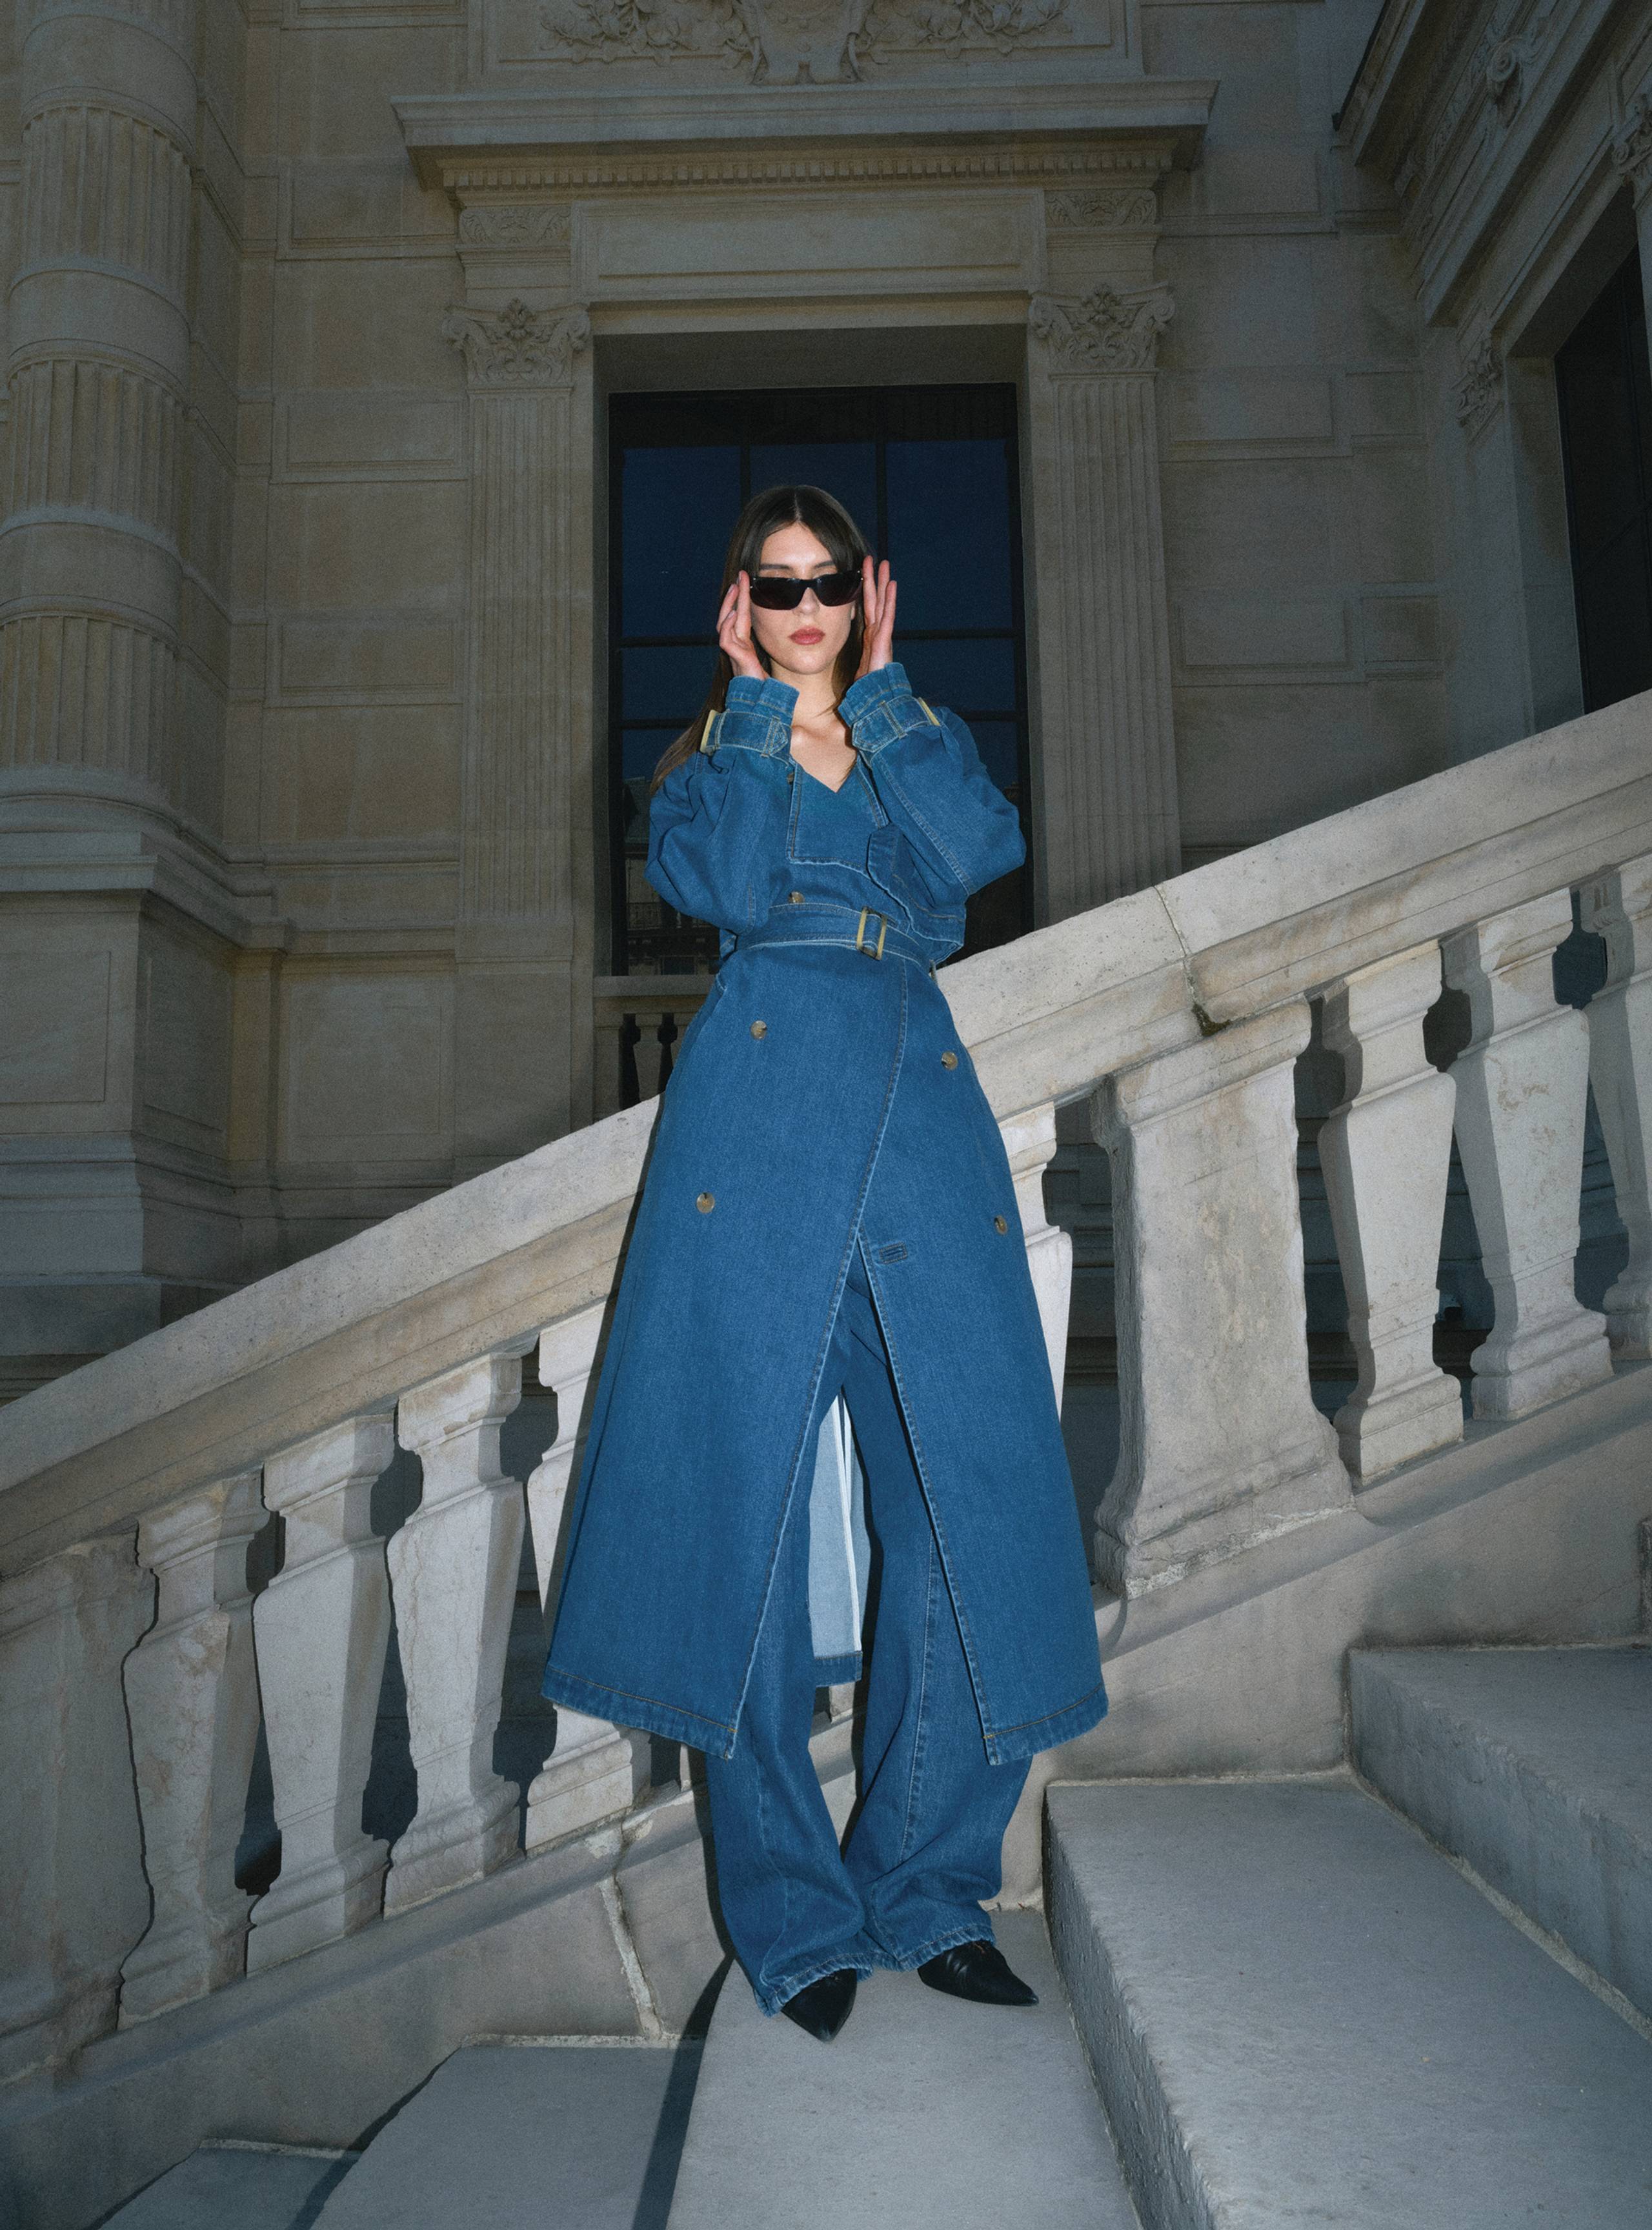 A model standing on a staircase wearing the Harriet Denim Blue Denim coat